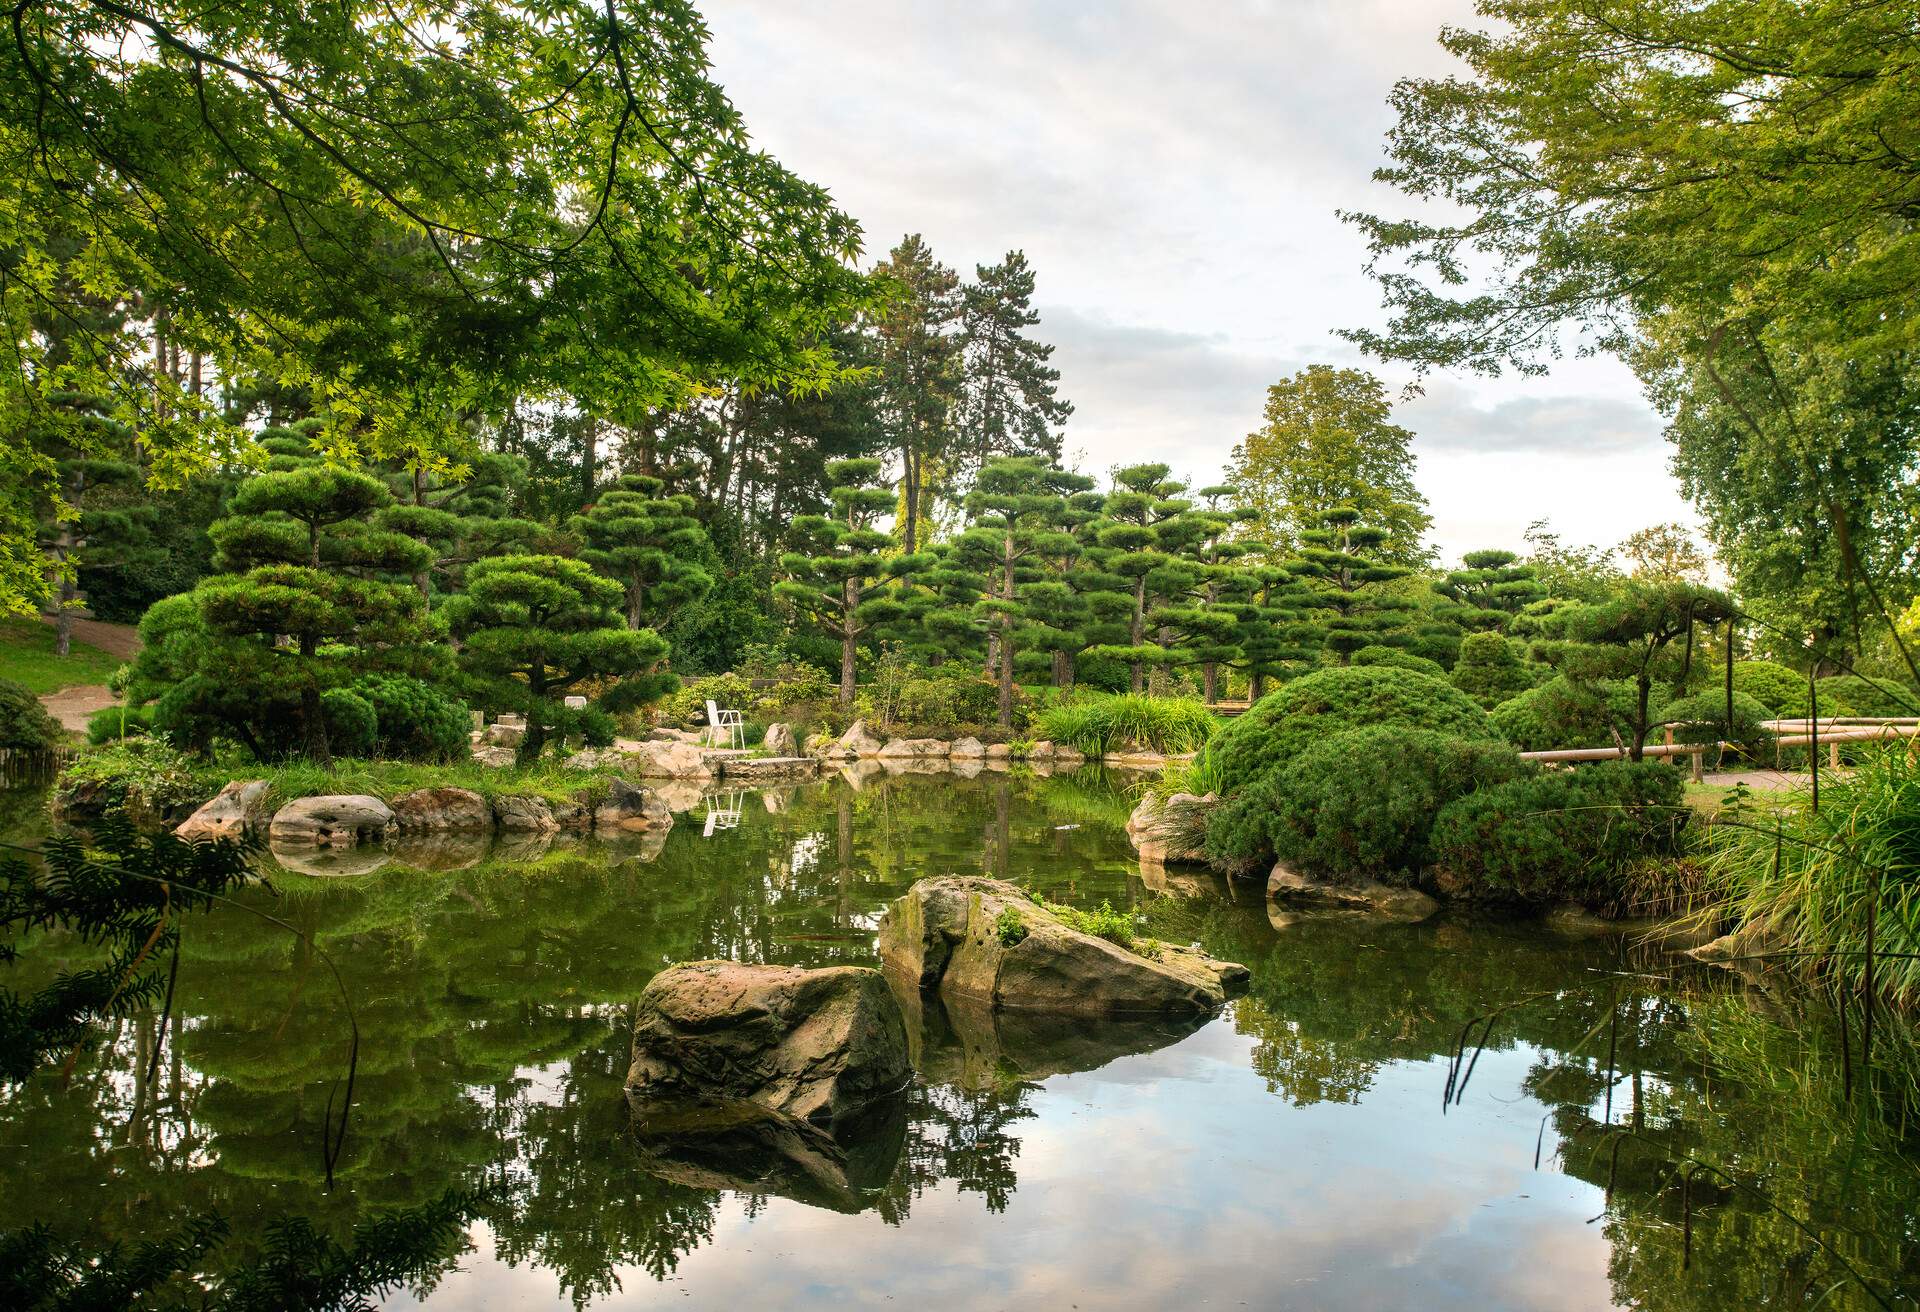 Japanese garden in NORDPARK in Dusseldorf with pond and topiary trees and bushes and and KOI carps and rocks in water and japanese maples in left corner.